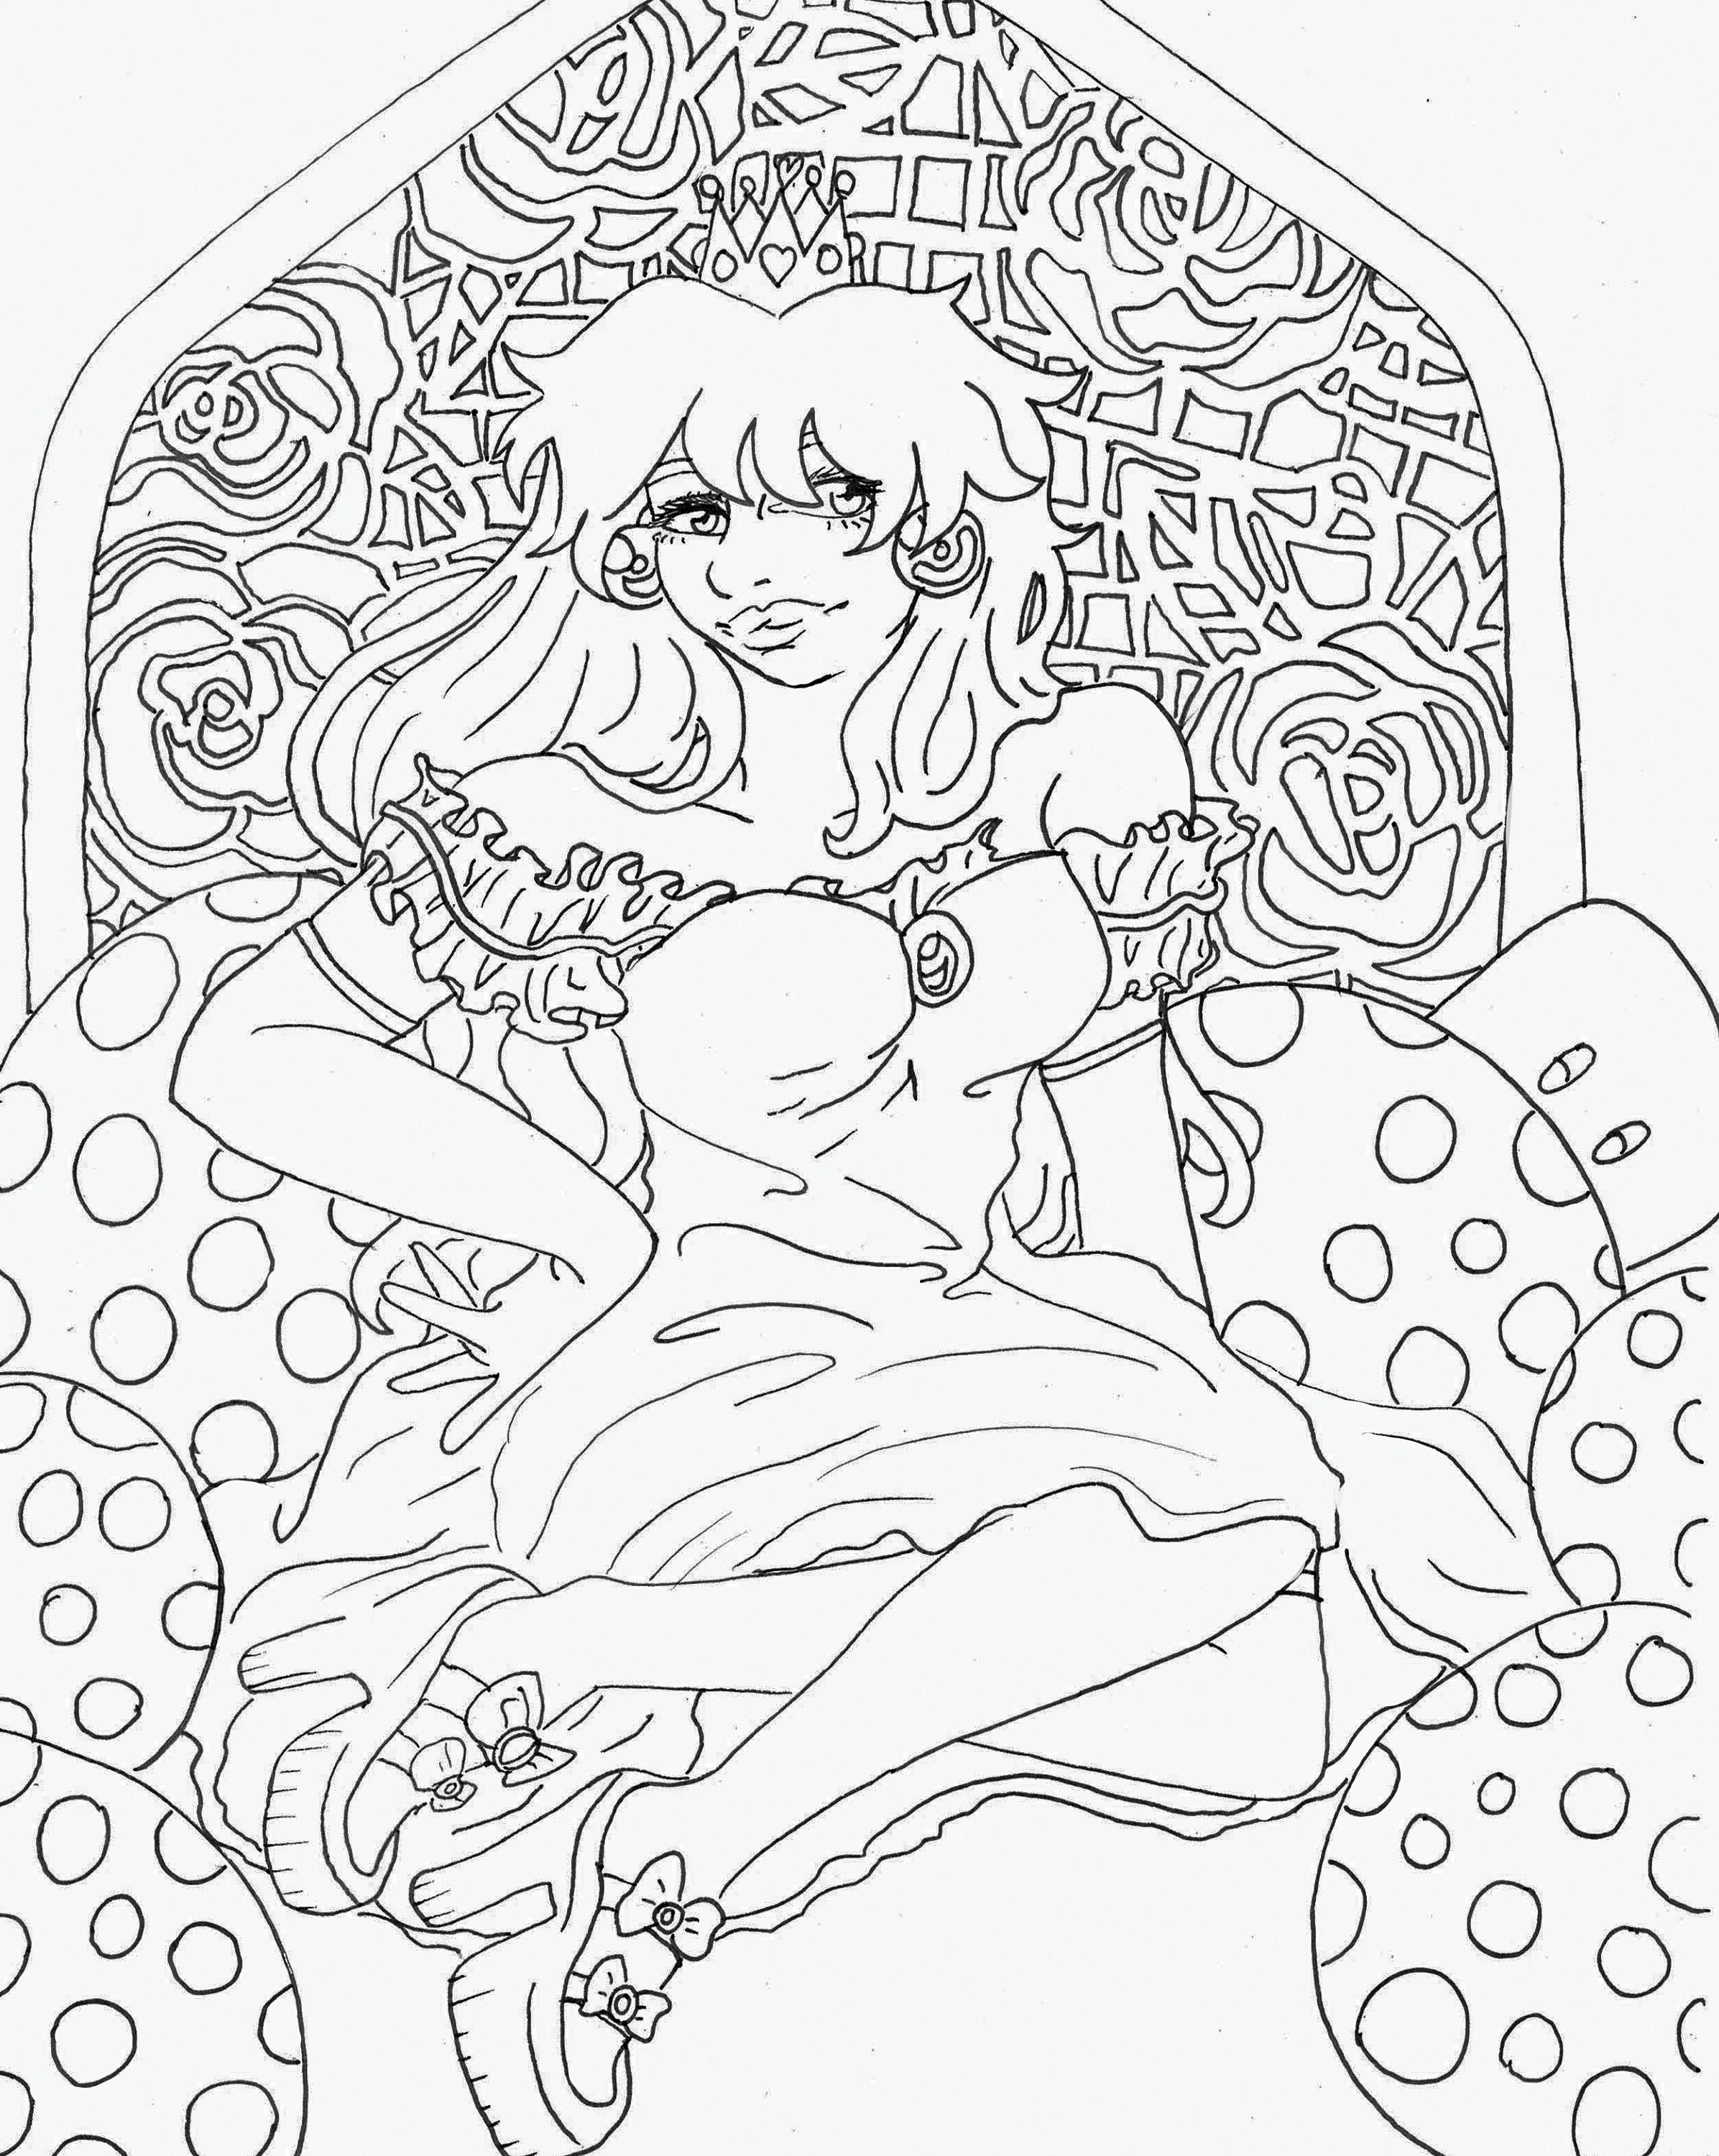 Princess peach pin up coloring page instant download